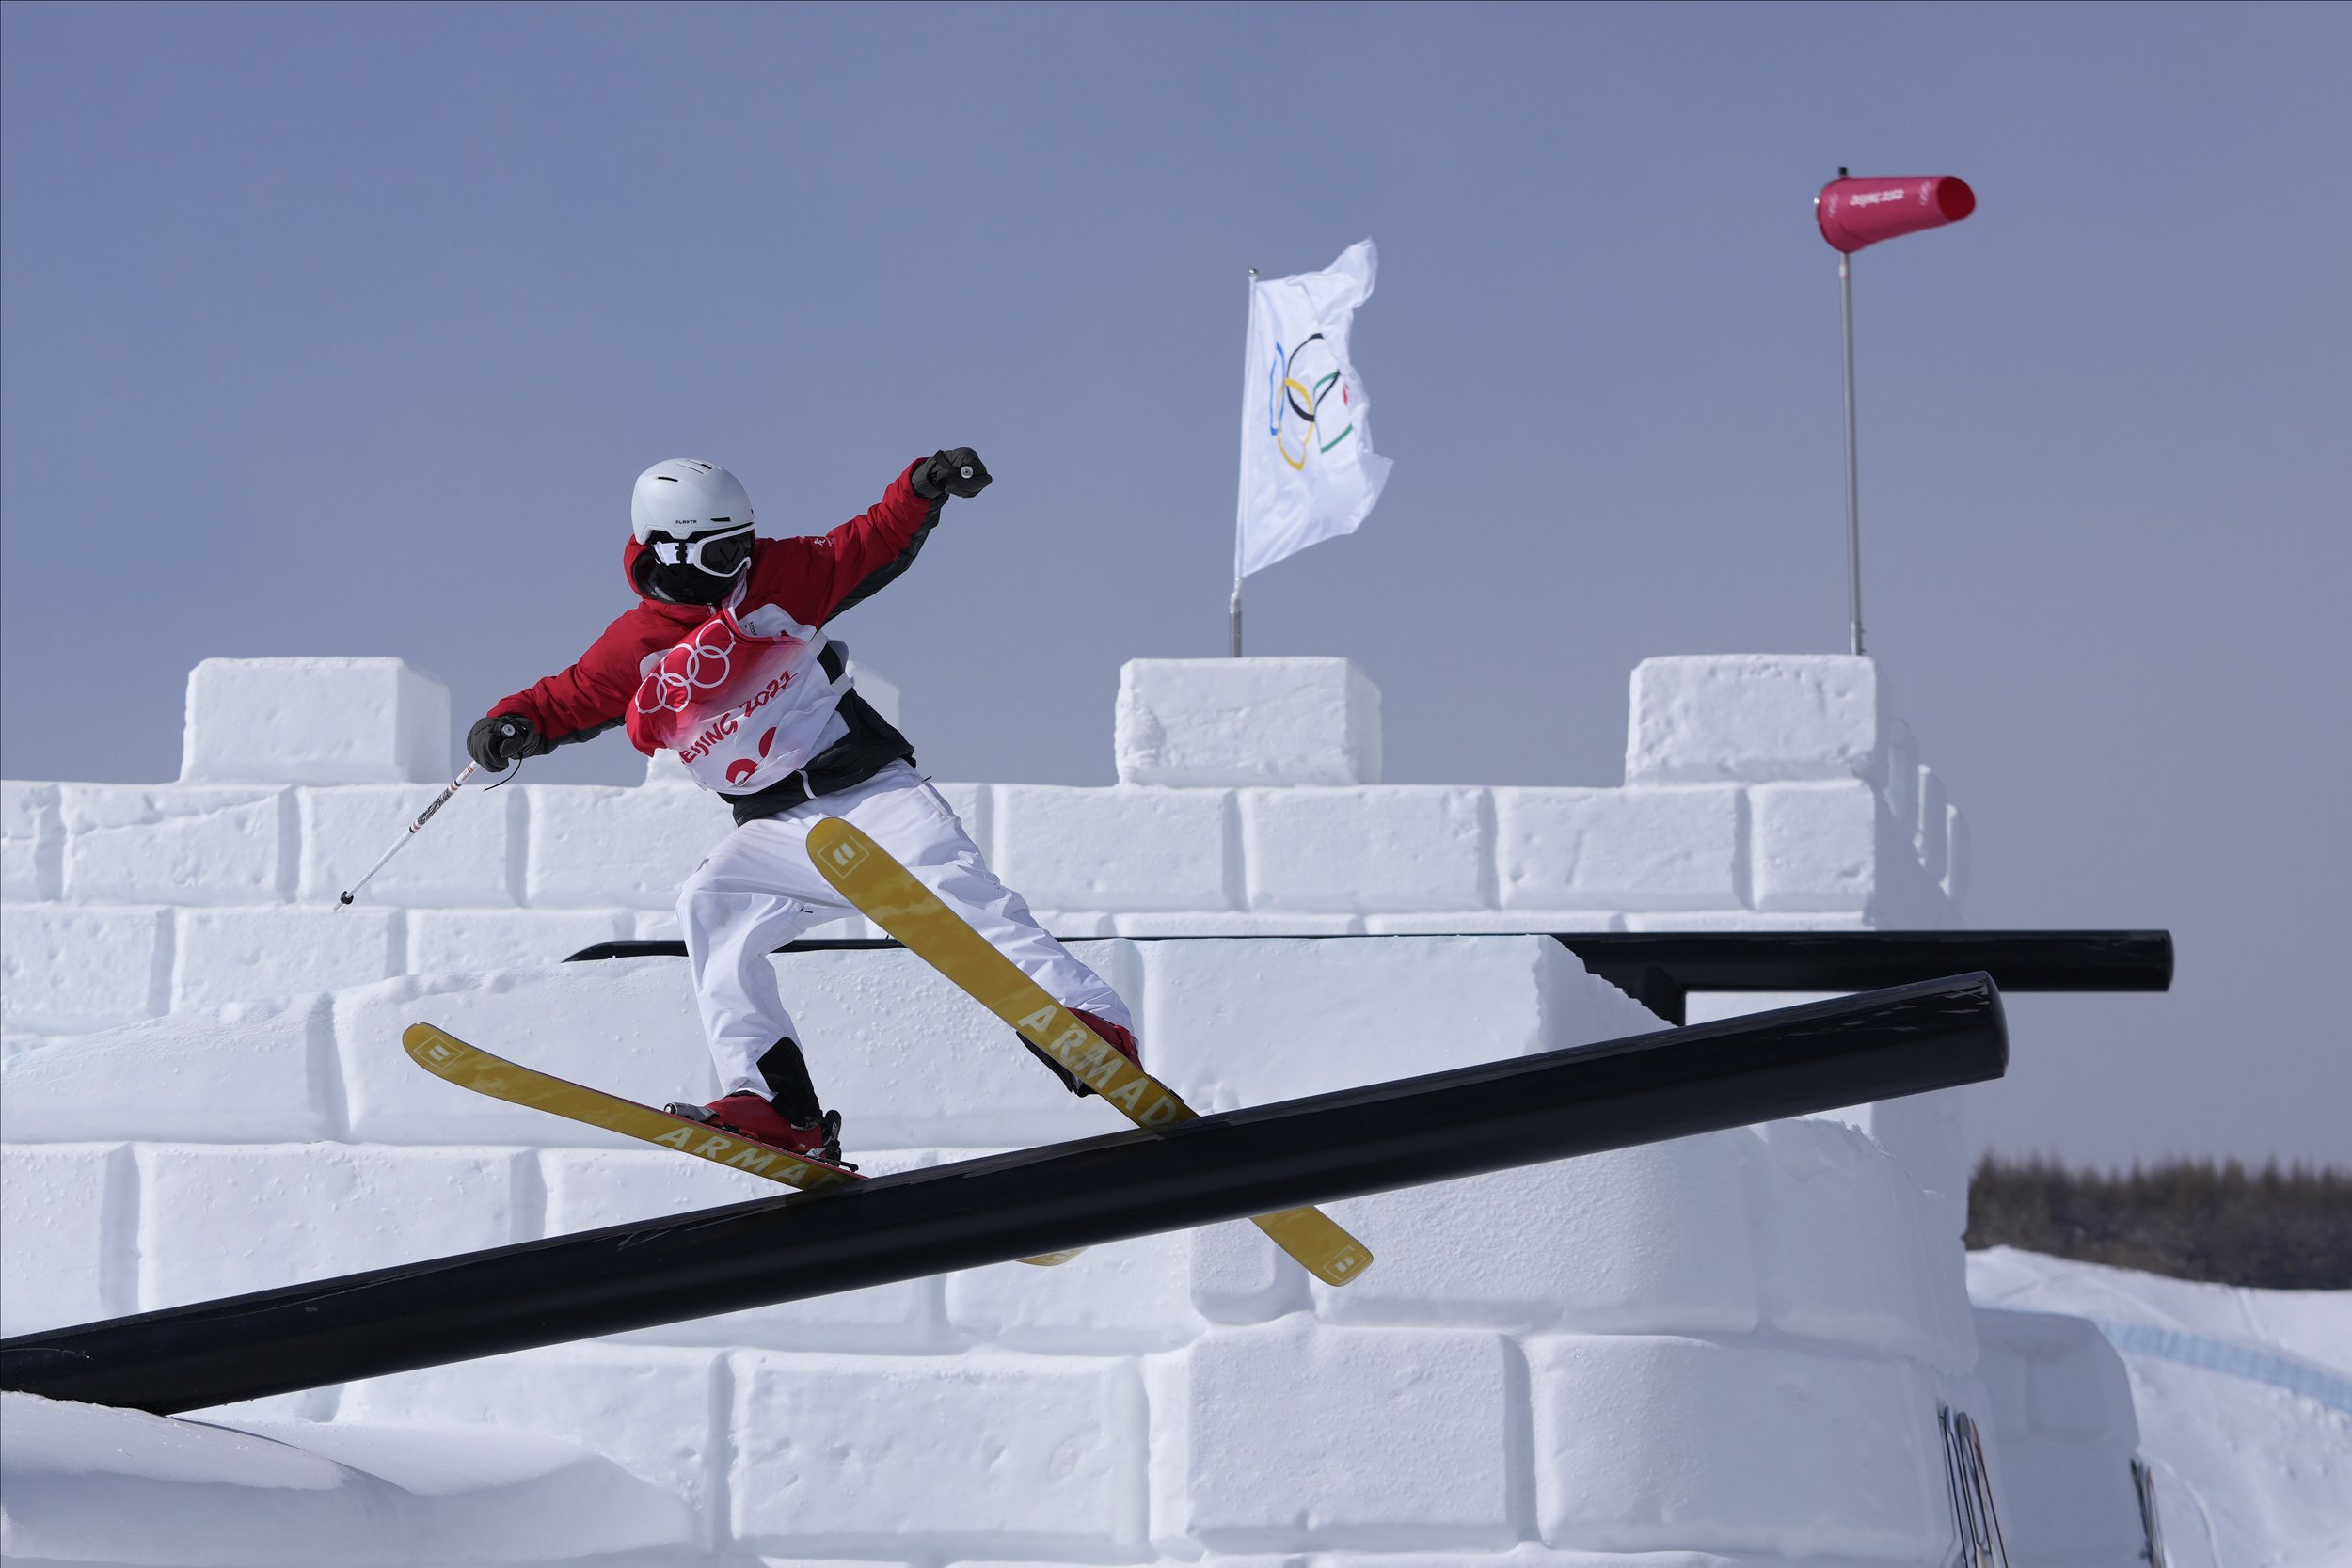  Austria's Daniel Bacher competes during the men's slopestyle qualification at the 2022 Winter Olympics, Tuesday, Feb. 15, 2022, in Zhangjiakou, China. (AP Photo/Lee Jin-man) 